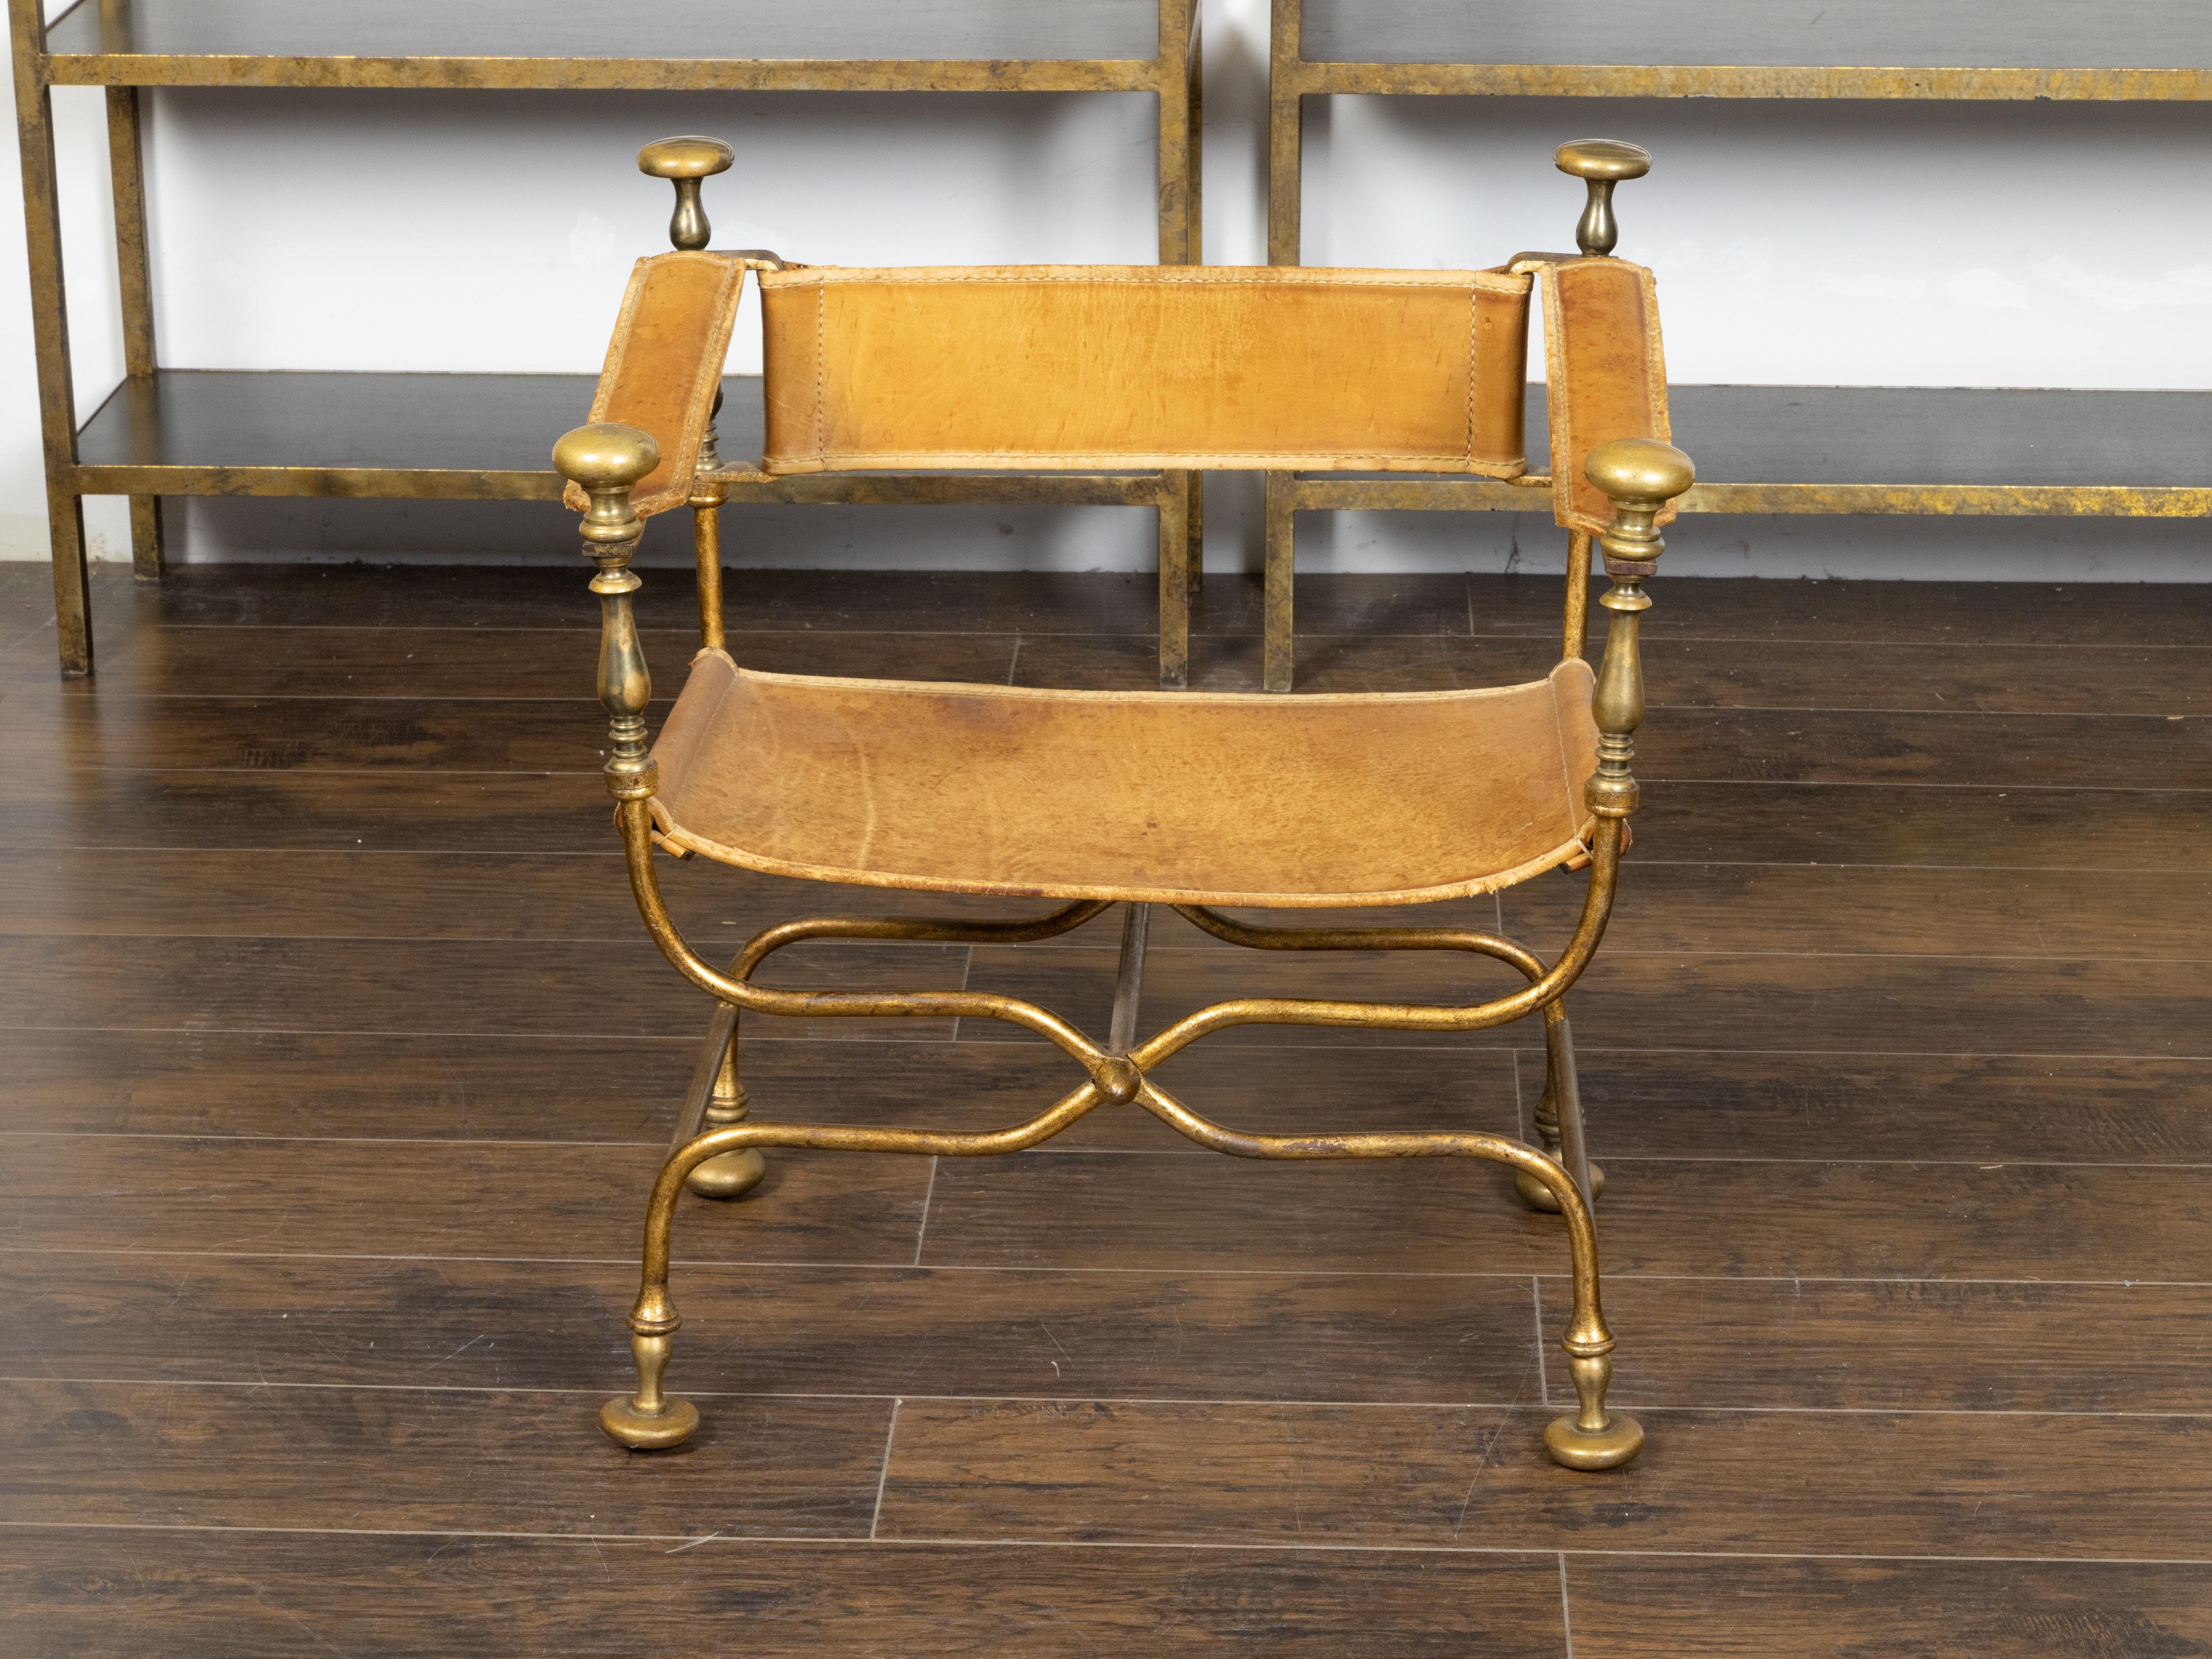 An Italian vintage gilt iron Savonarola curule armchair from the mid 20th century, with leather seat, flattened finials and X-Form base. Created in Italy during the Midcentury period, this Savonarola chair features a gilt iron structure with a shape